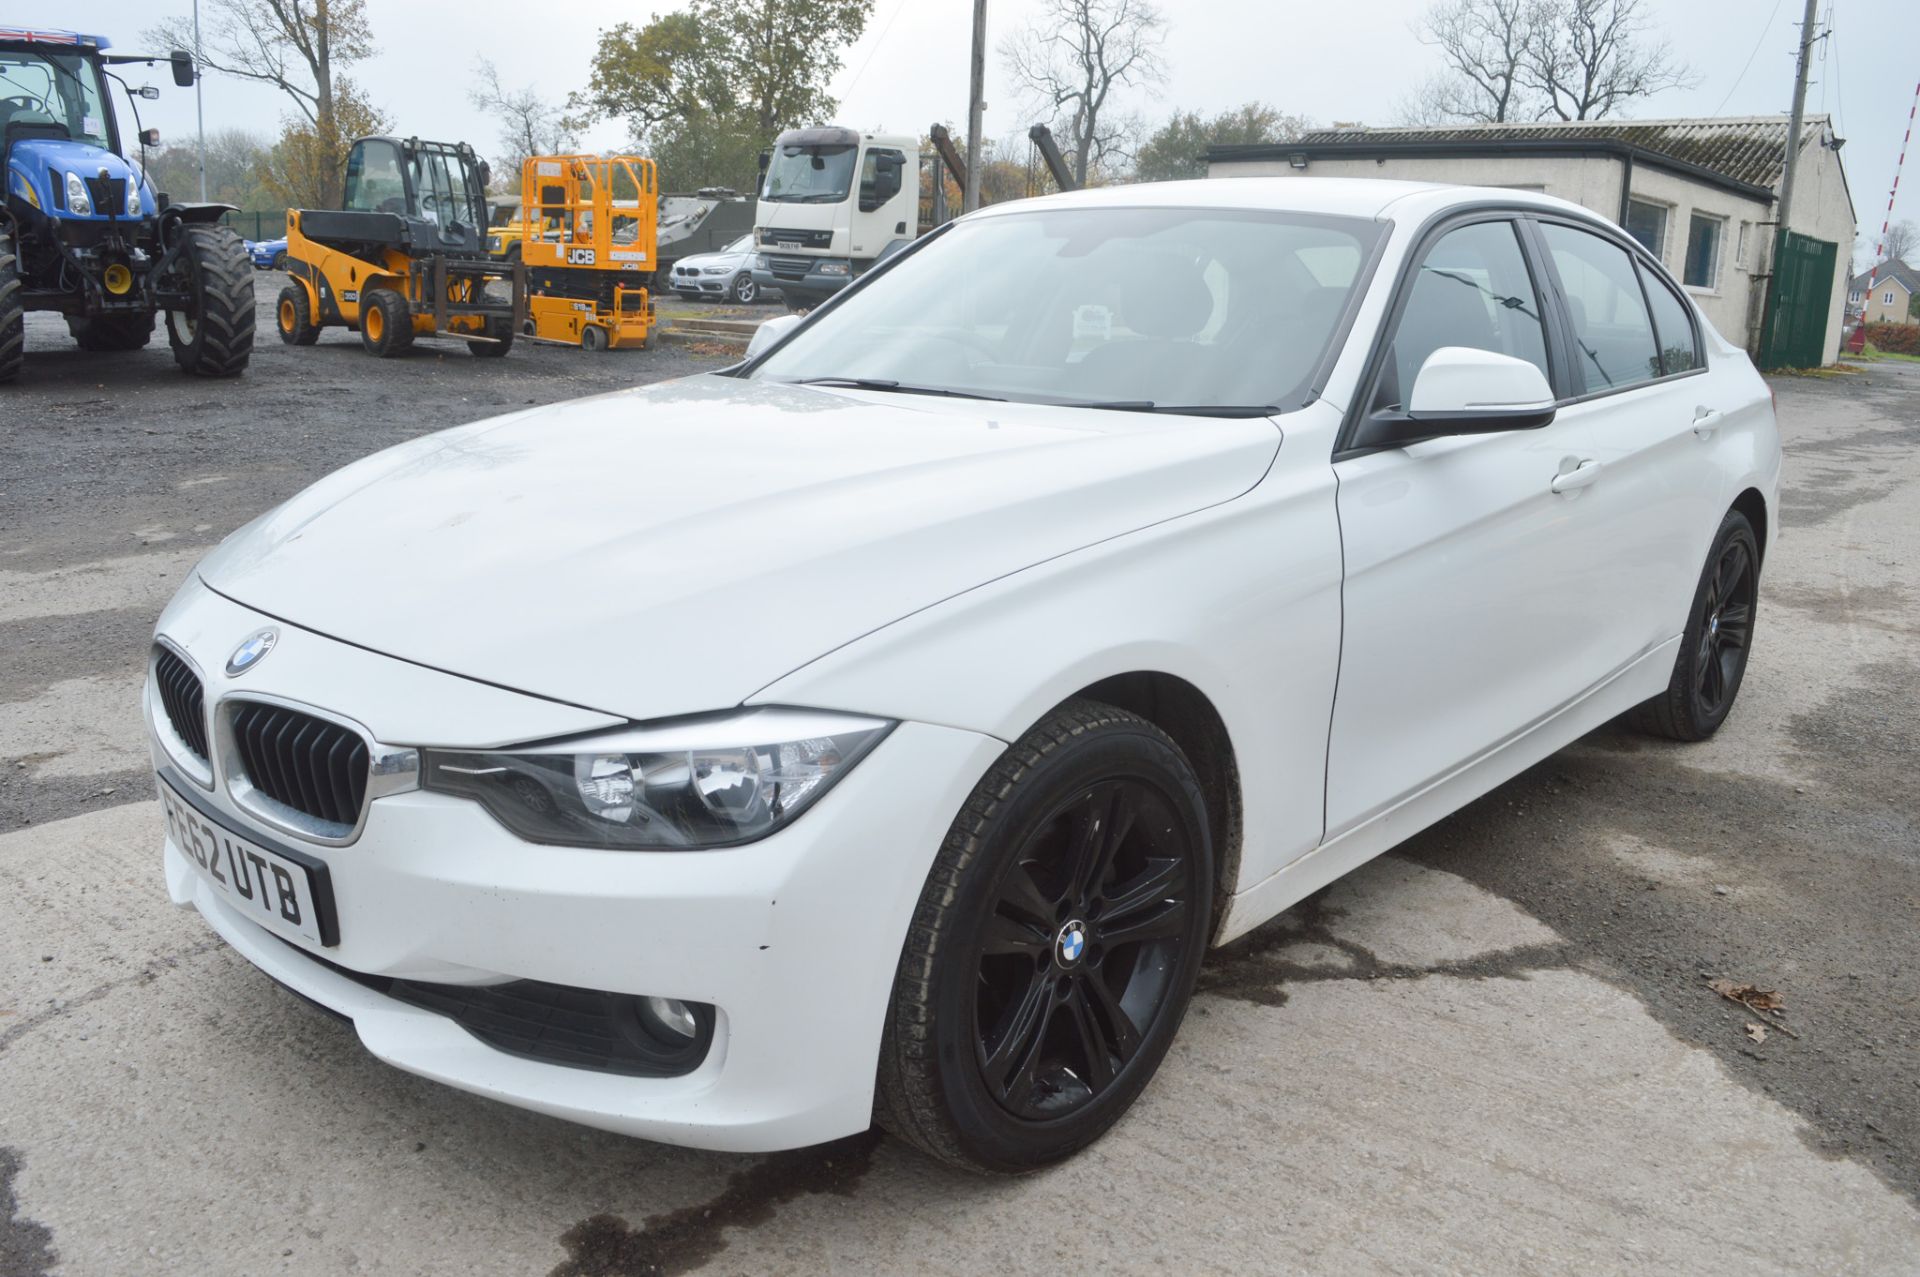 BMW 3 Series 2.0 320d Sport 4dr automatic saloon car  Registration Number: FE62 UTB Date of